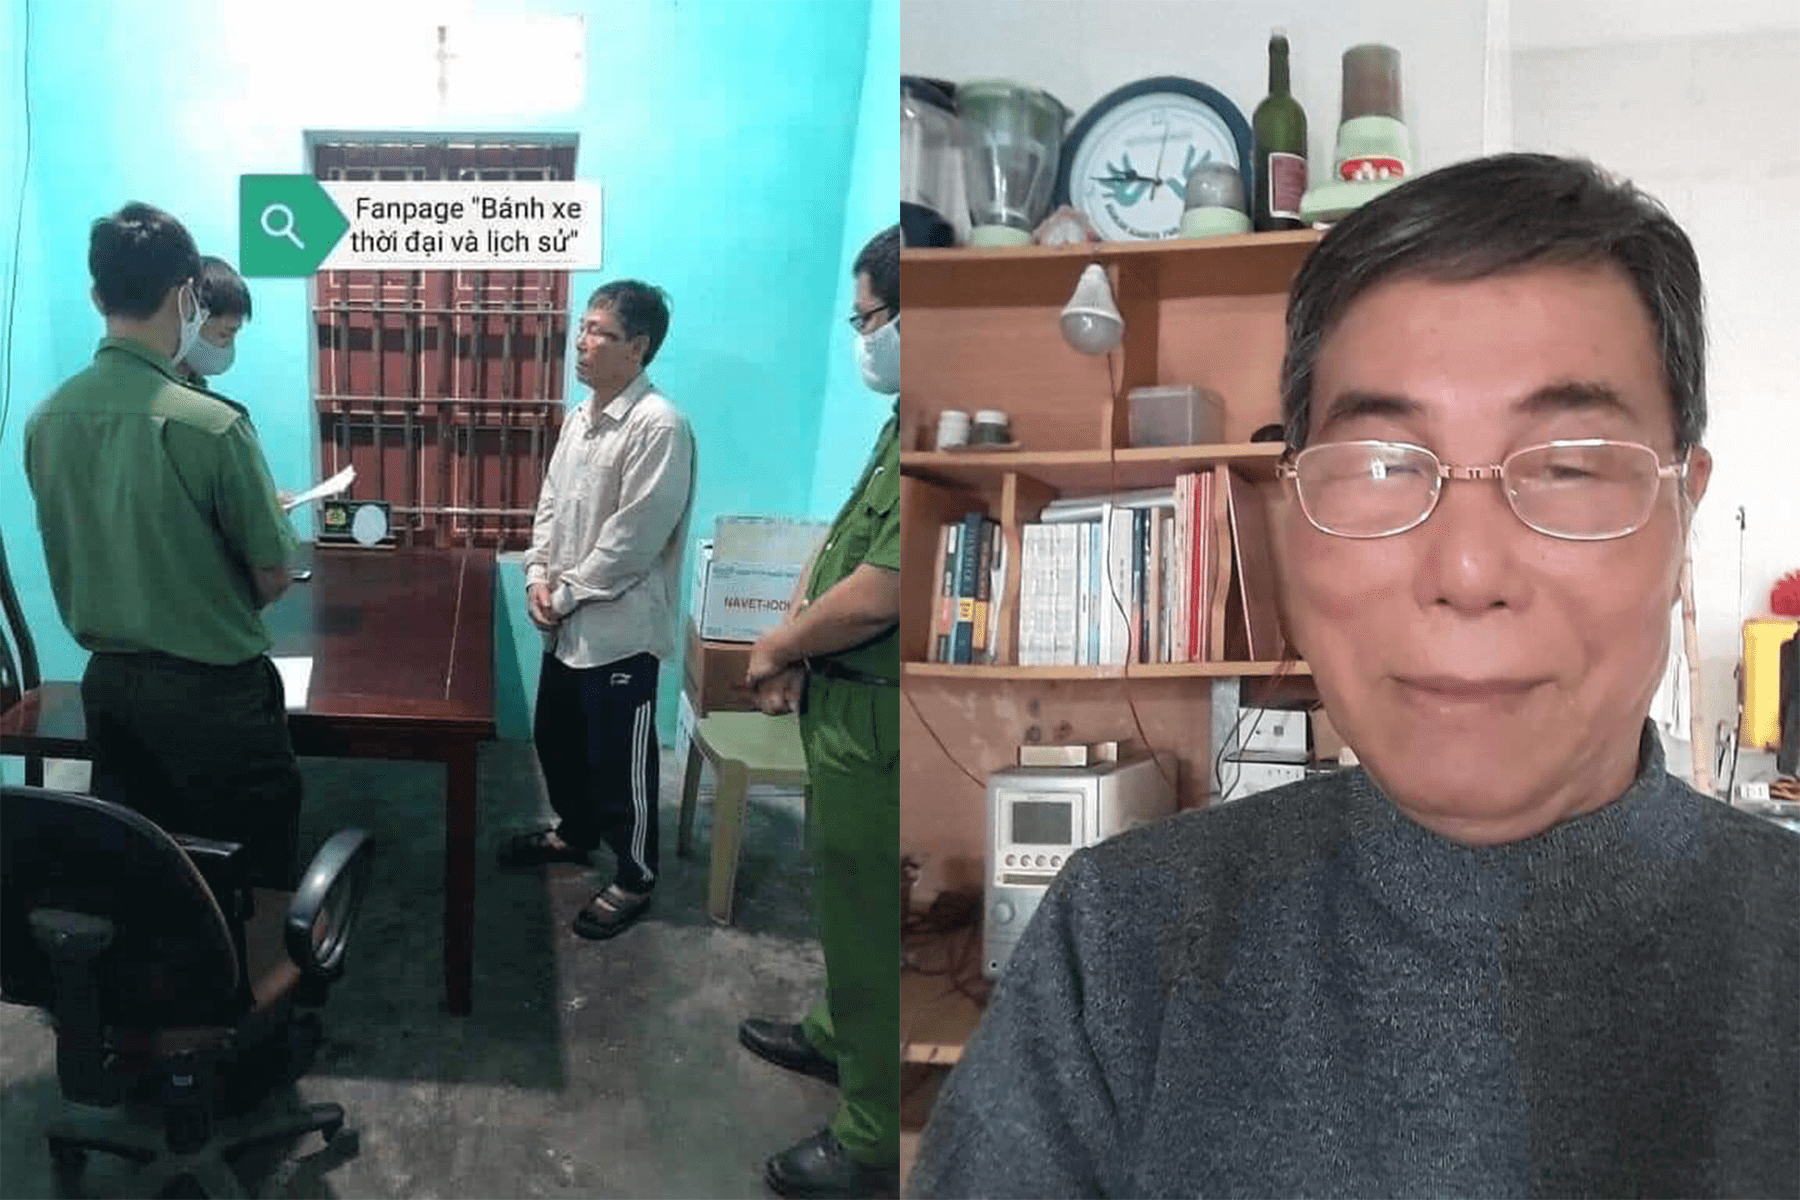 Vietnamese Activist Tran Duc Thach Arrested, Beaten, and Detained for Facebook Post